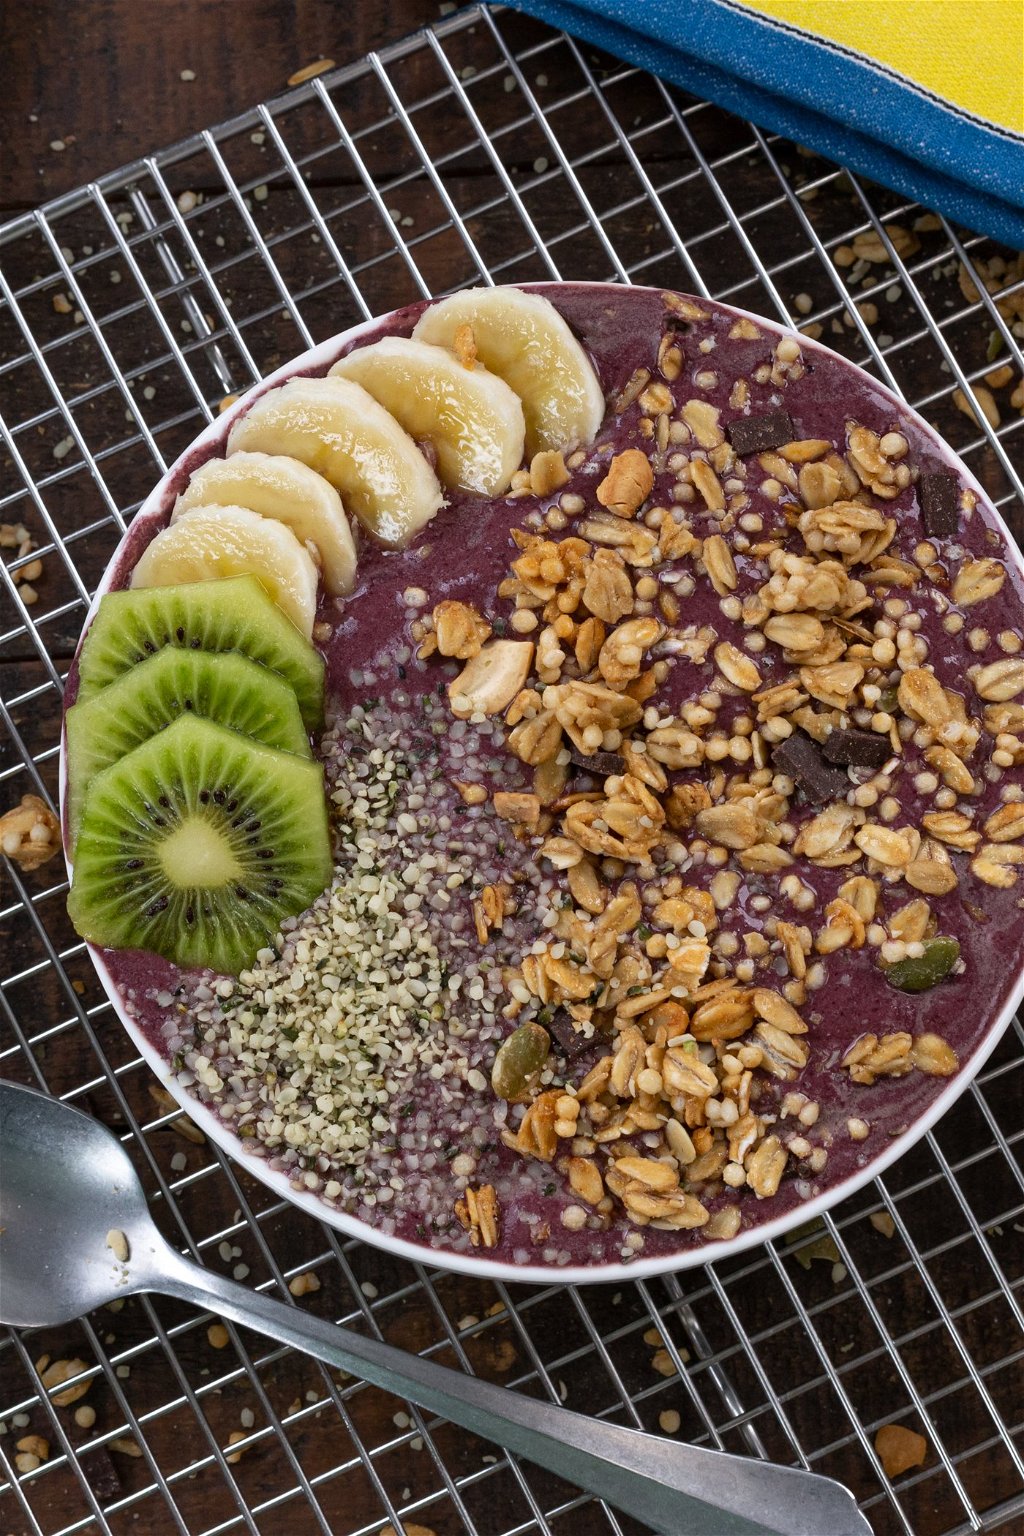 https://media.theproteinchef.co/wp-content/uploads/2022/05/High-Protein-Acai-Bowl-Recipe.jpg